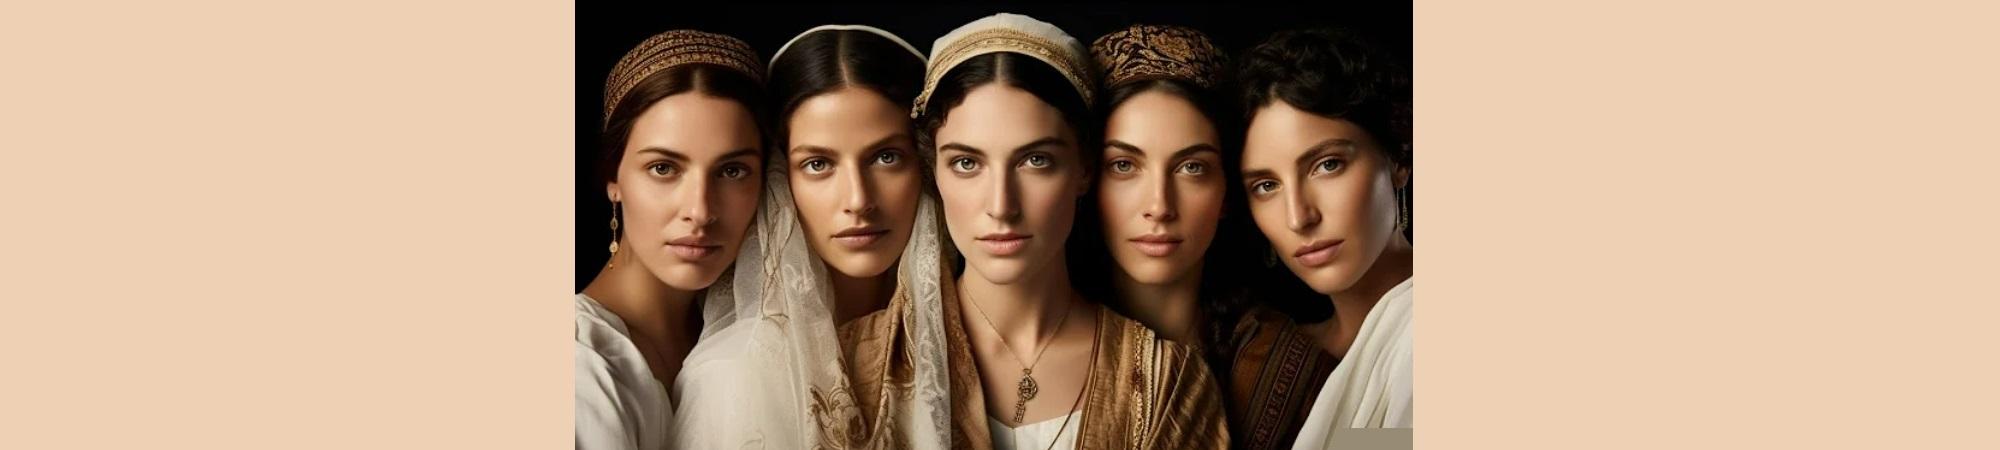 Image of the Five daughters of Zelophehad dressed as Hebrew women.